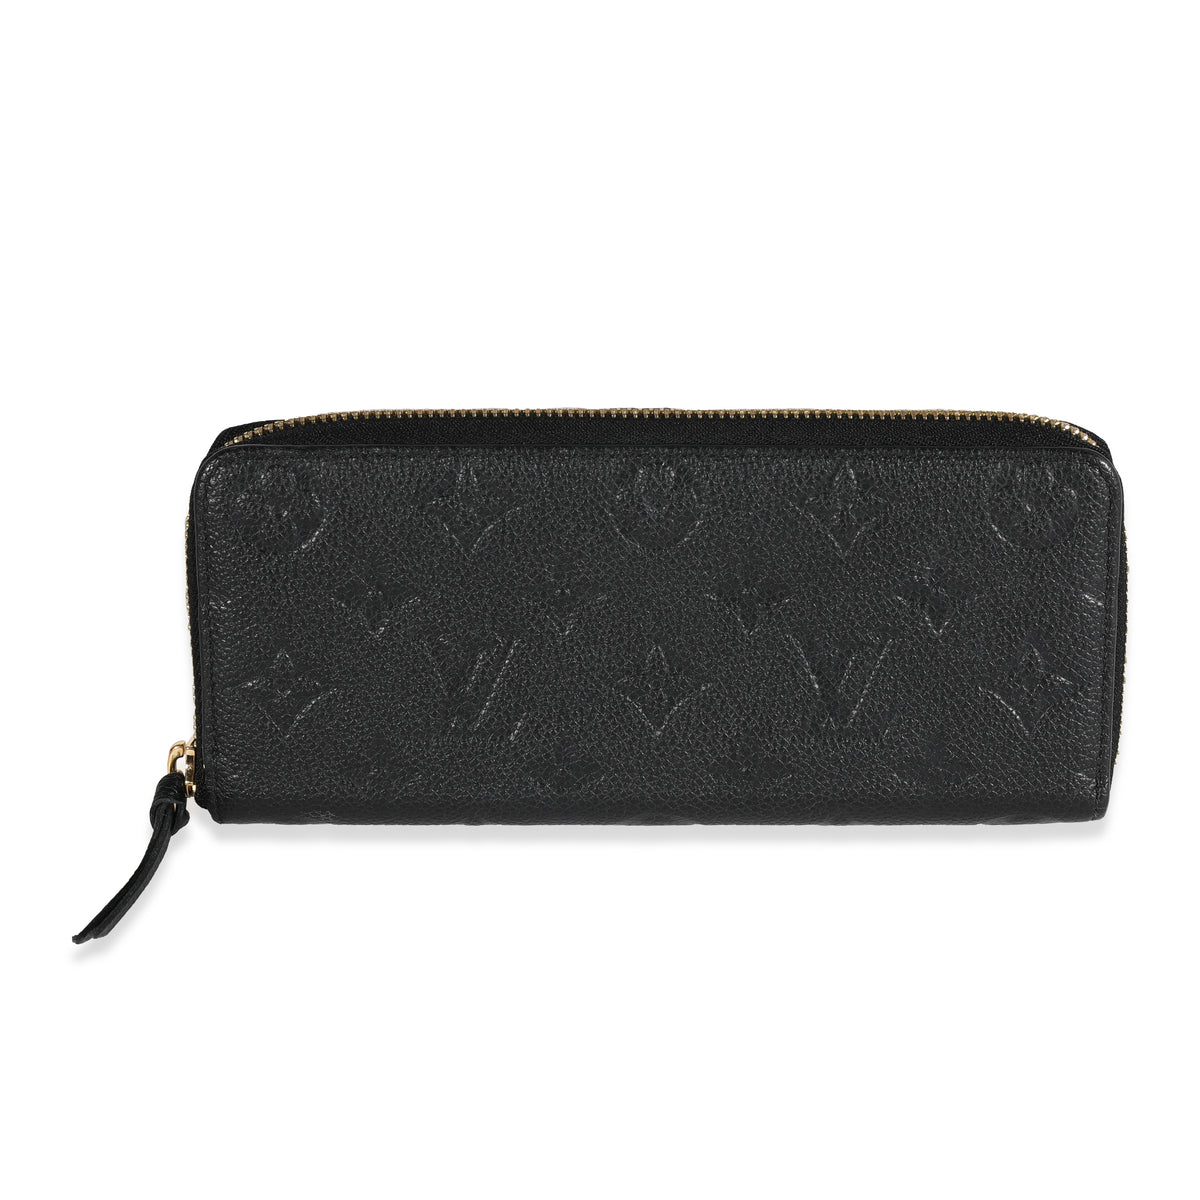 Newest addition - clemence wallet in black empreinte leather